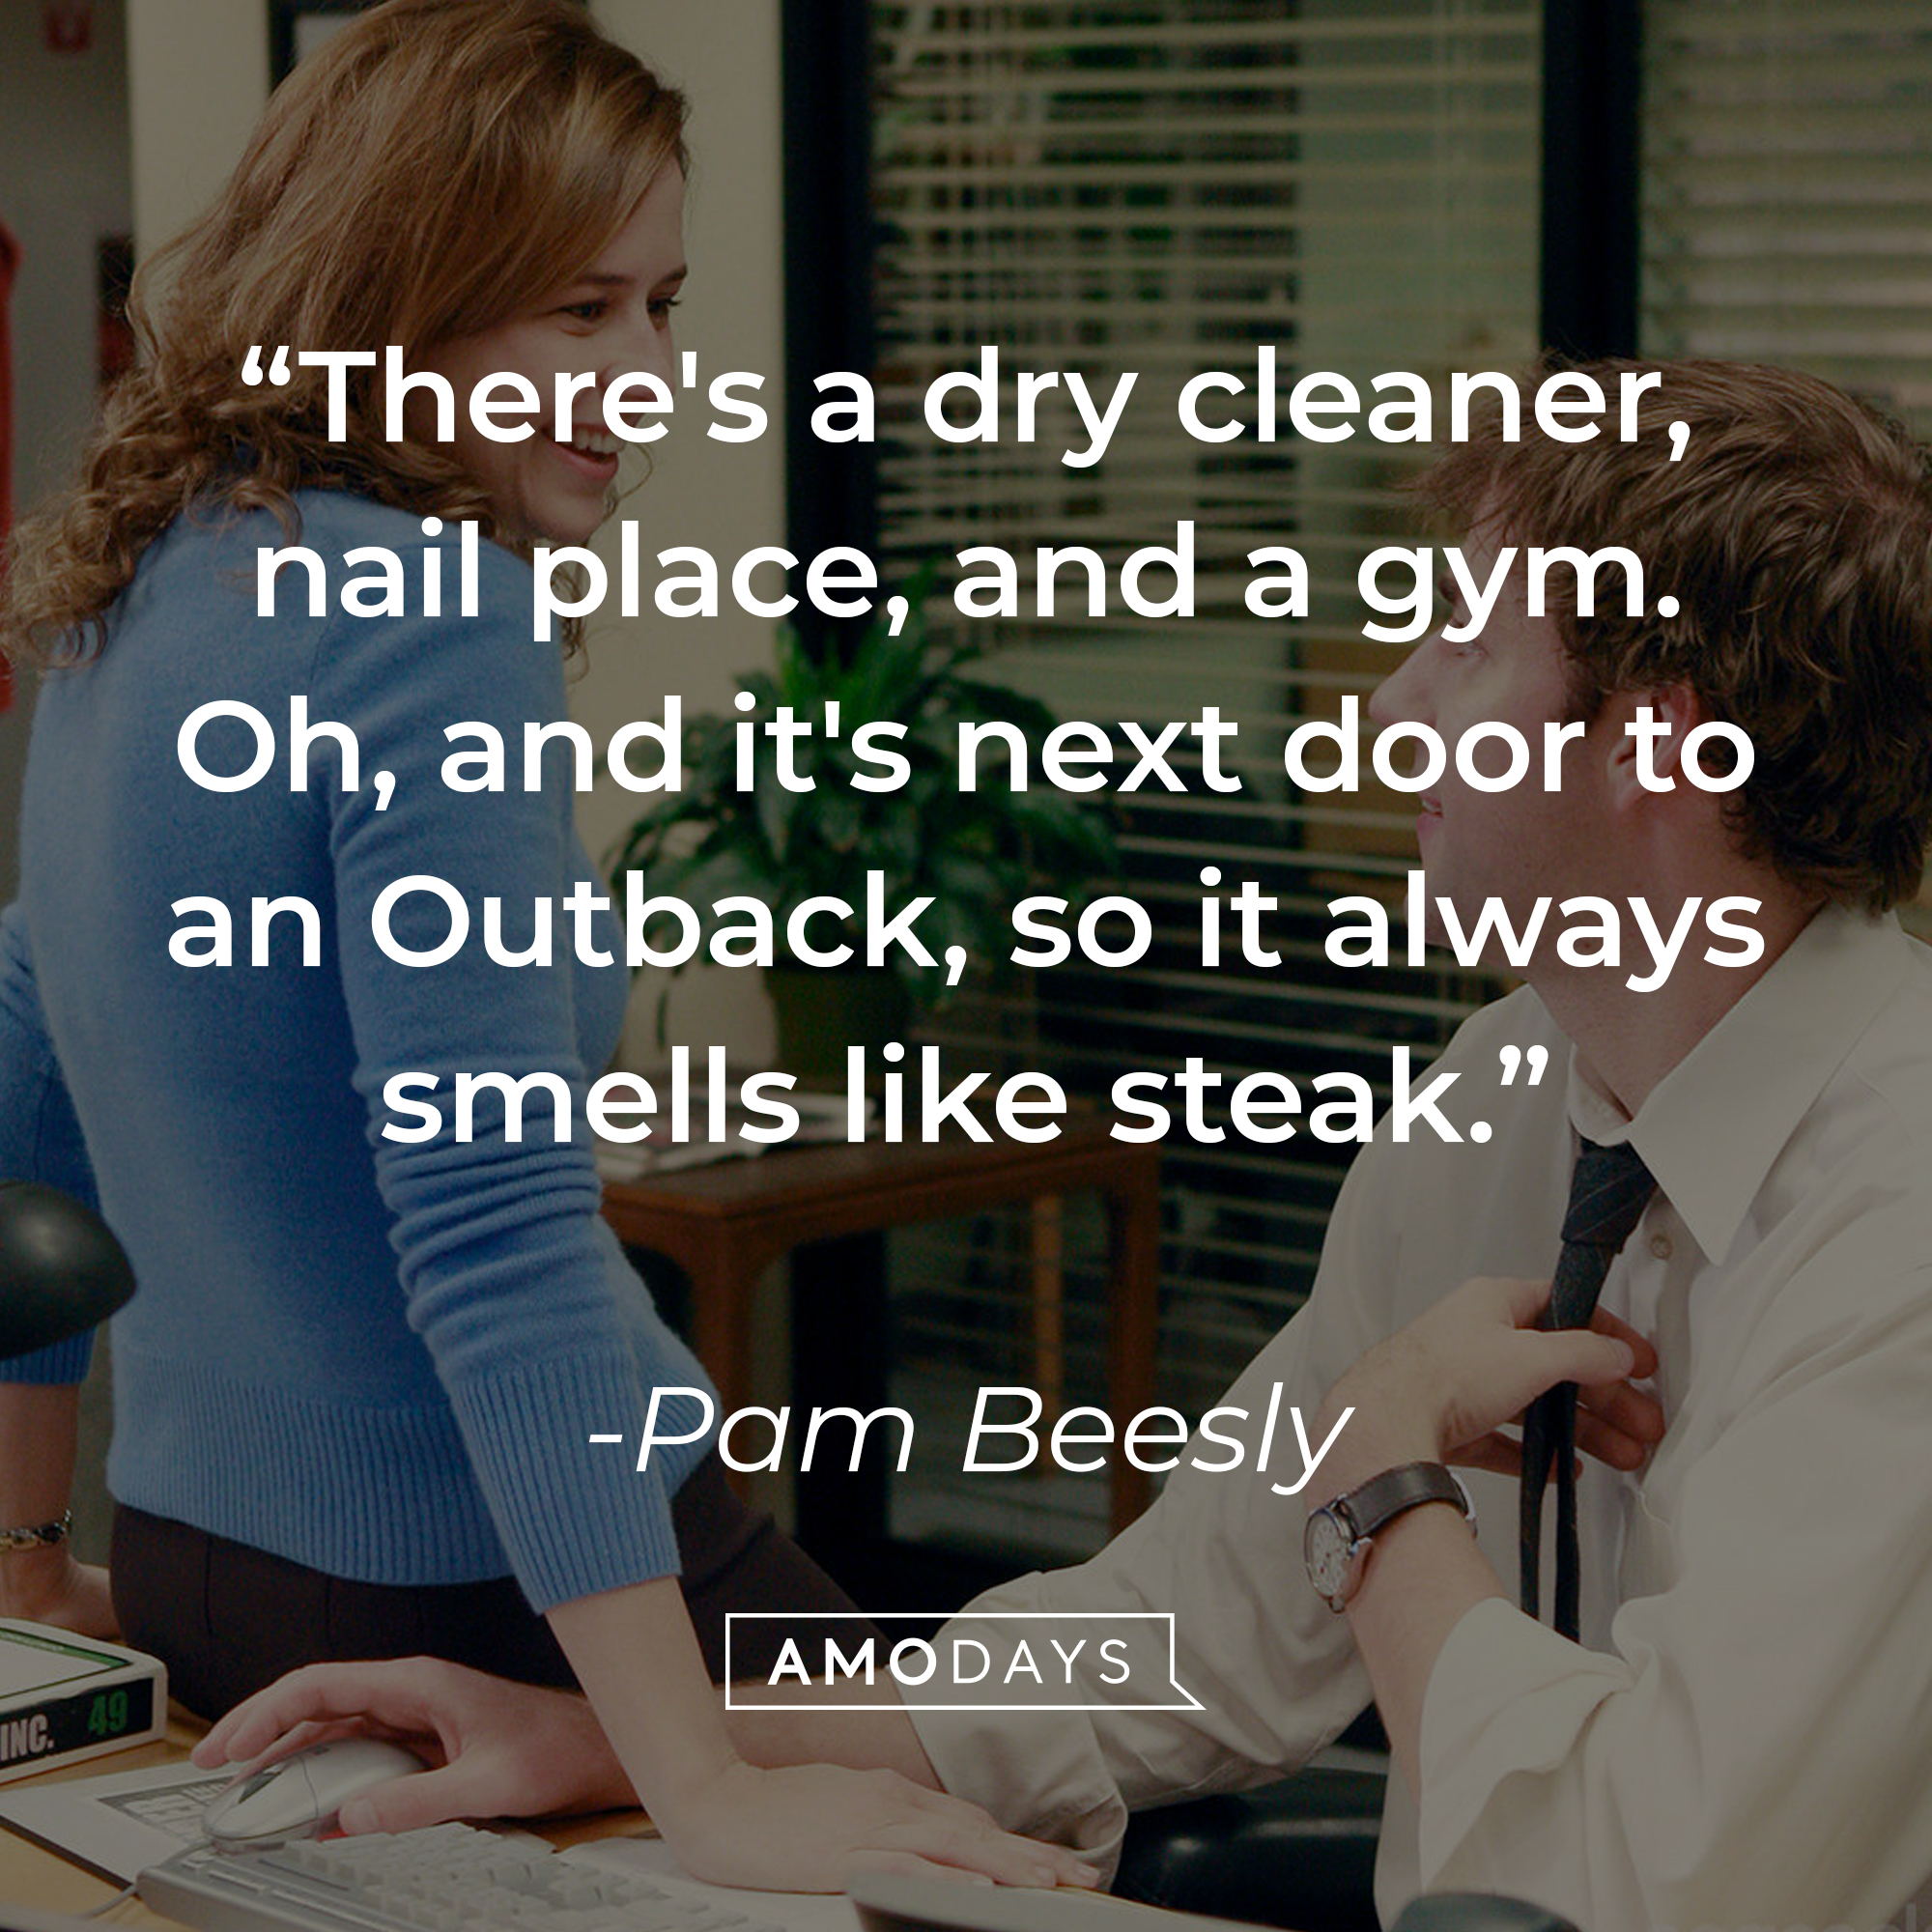 Pam Beesly's quote, "There's a dry cleaner, nail place, and a gym. Oh, and it's next door to an Outback, so it always smells like steak." | Source: Facebook/TheOfficeTV